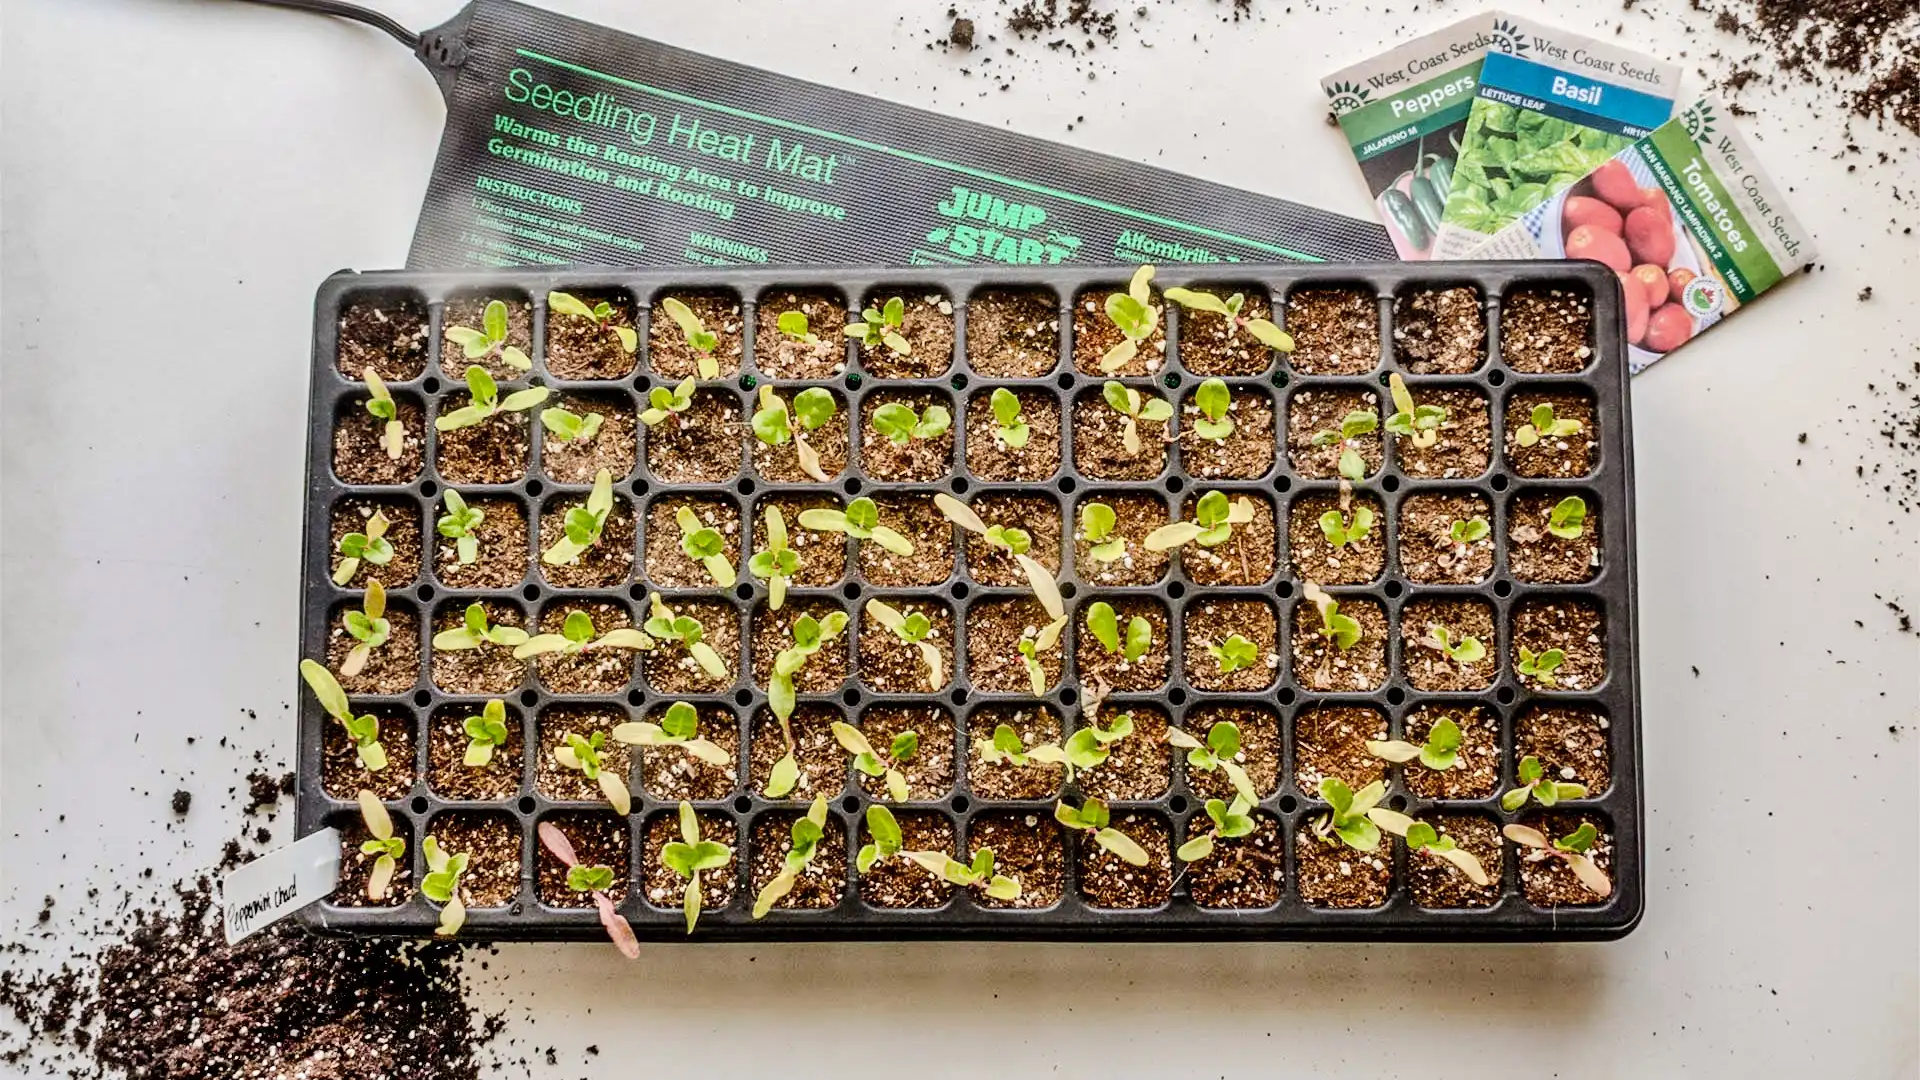 Seedling Heat Mats: How To Use A Heat Mat For Plants